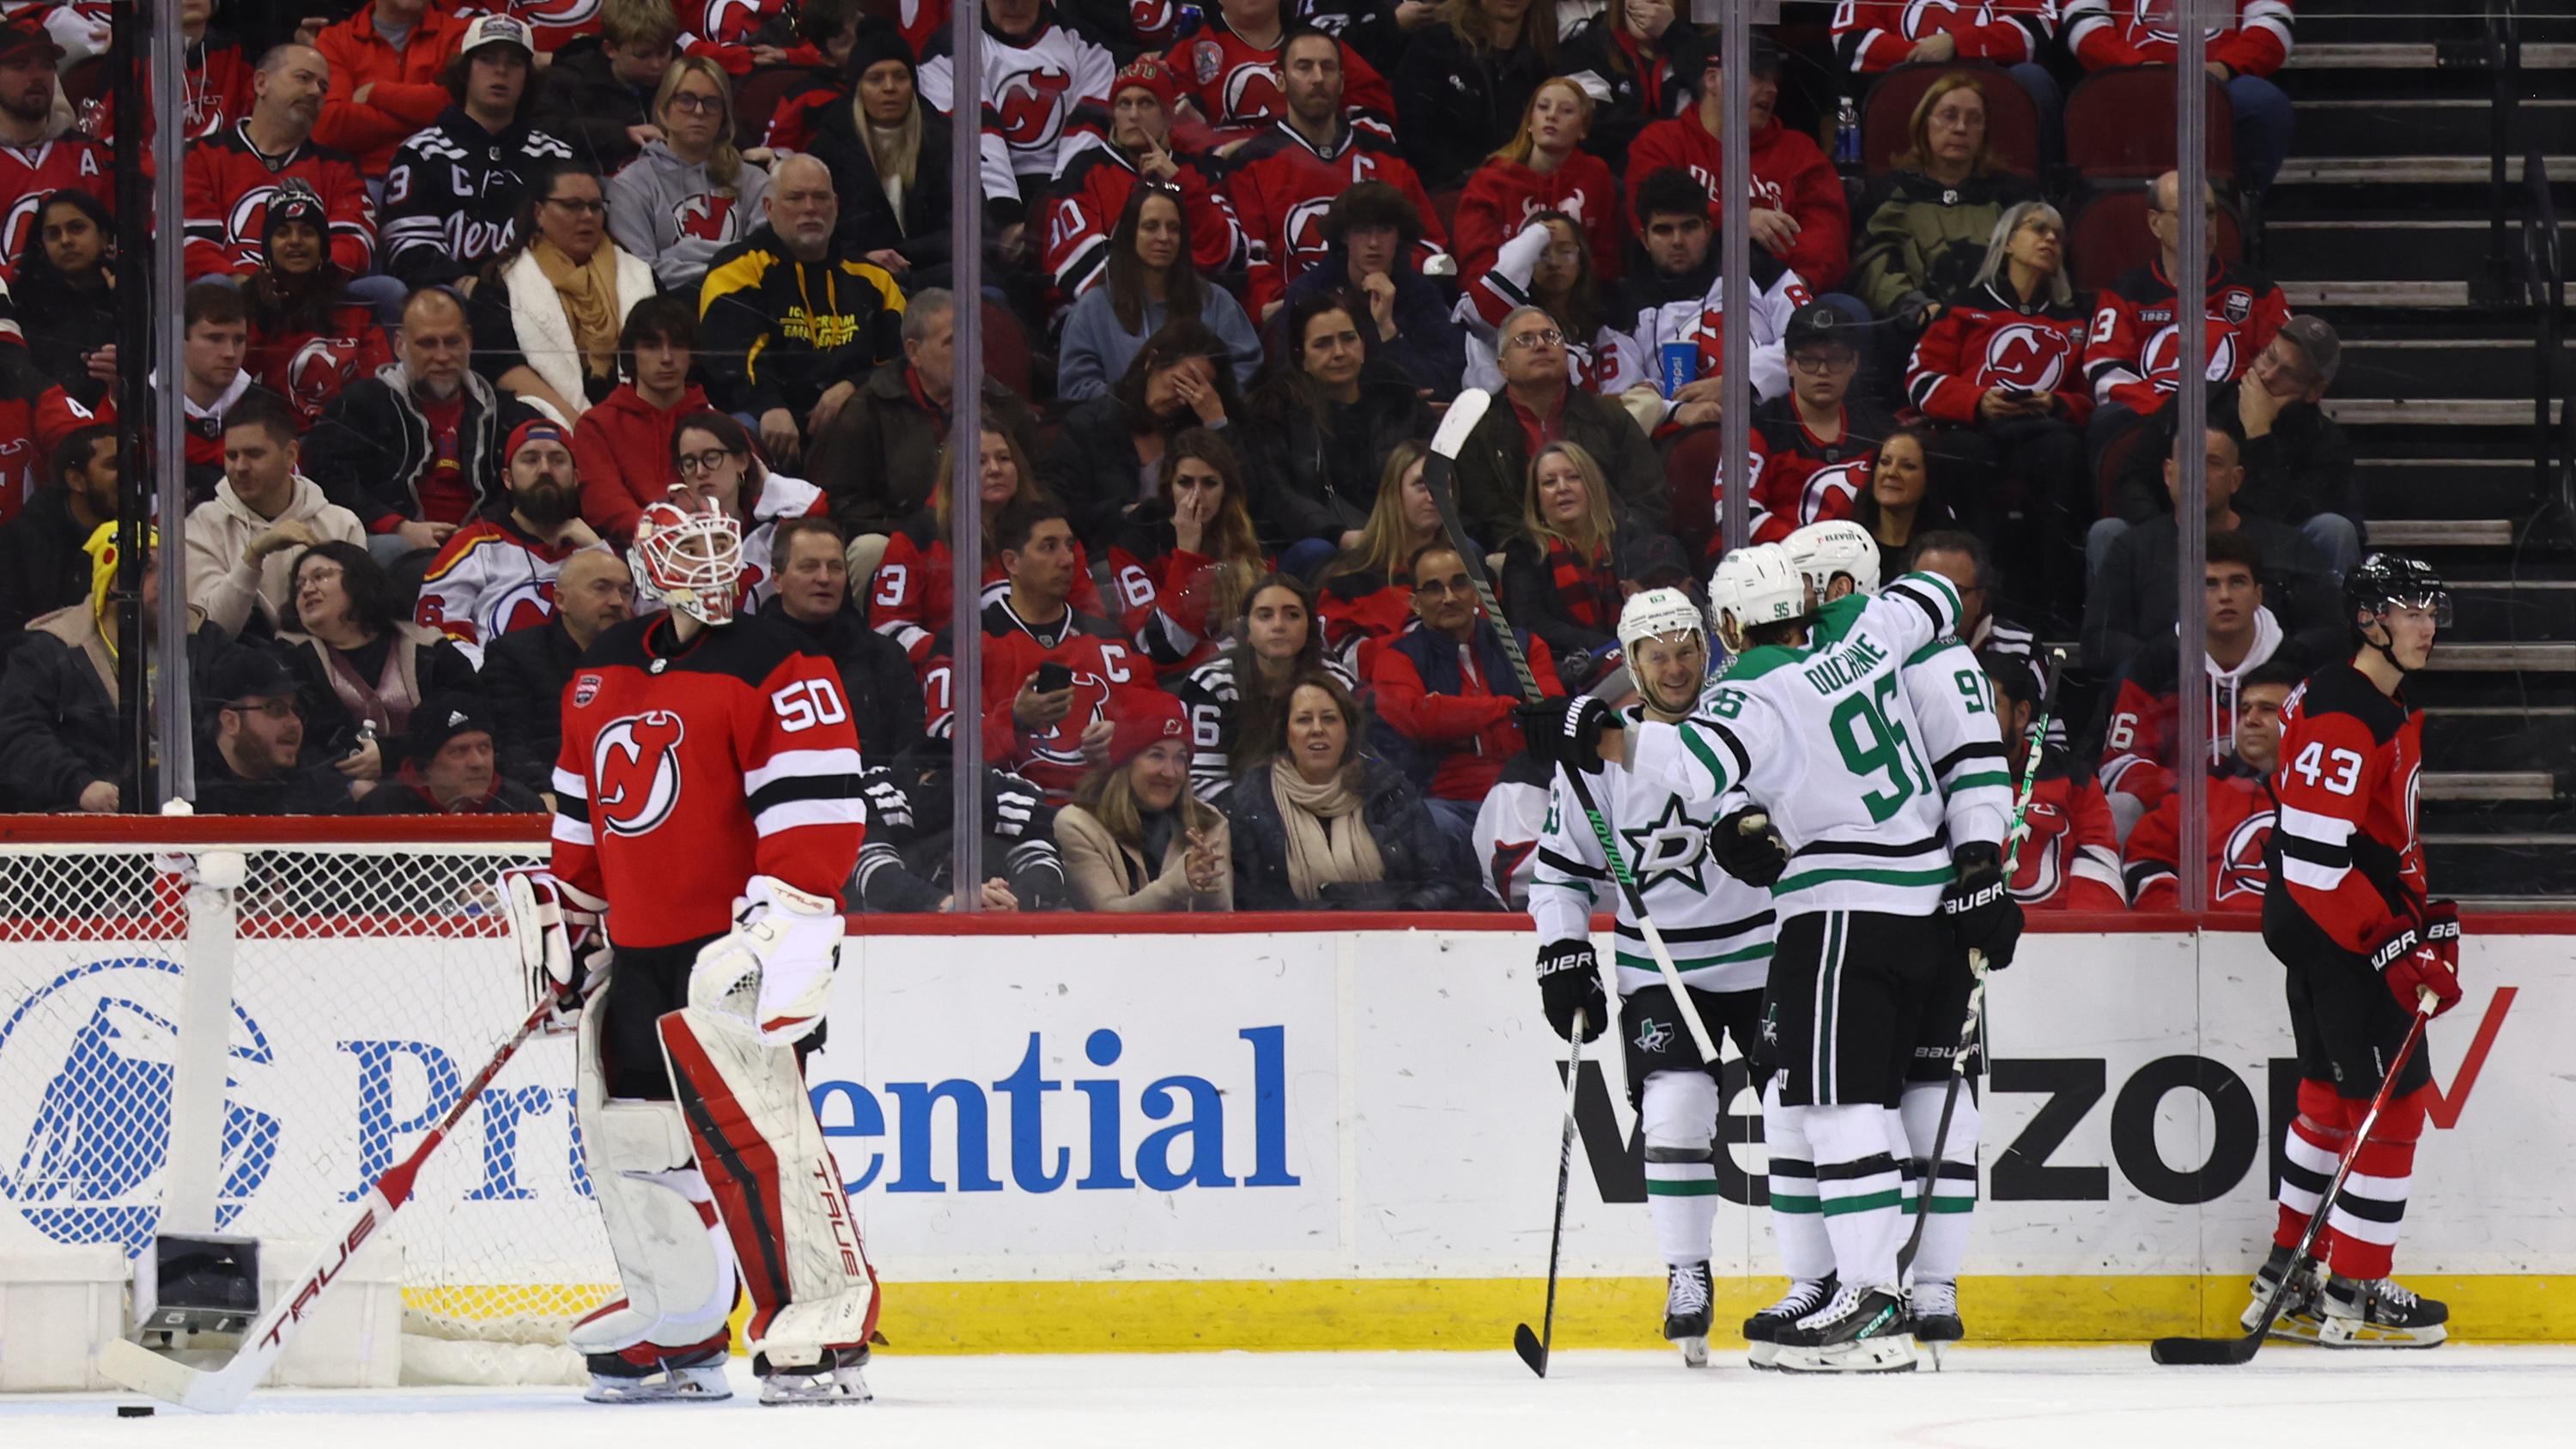 Dallas Stars center Matt Duchene (95) celebrates his goal against the New Jersey Devils during the second period at Prudential Center. / Ed Mulholland-USA TODAY Sports